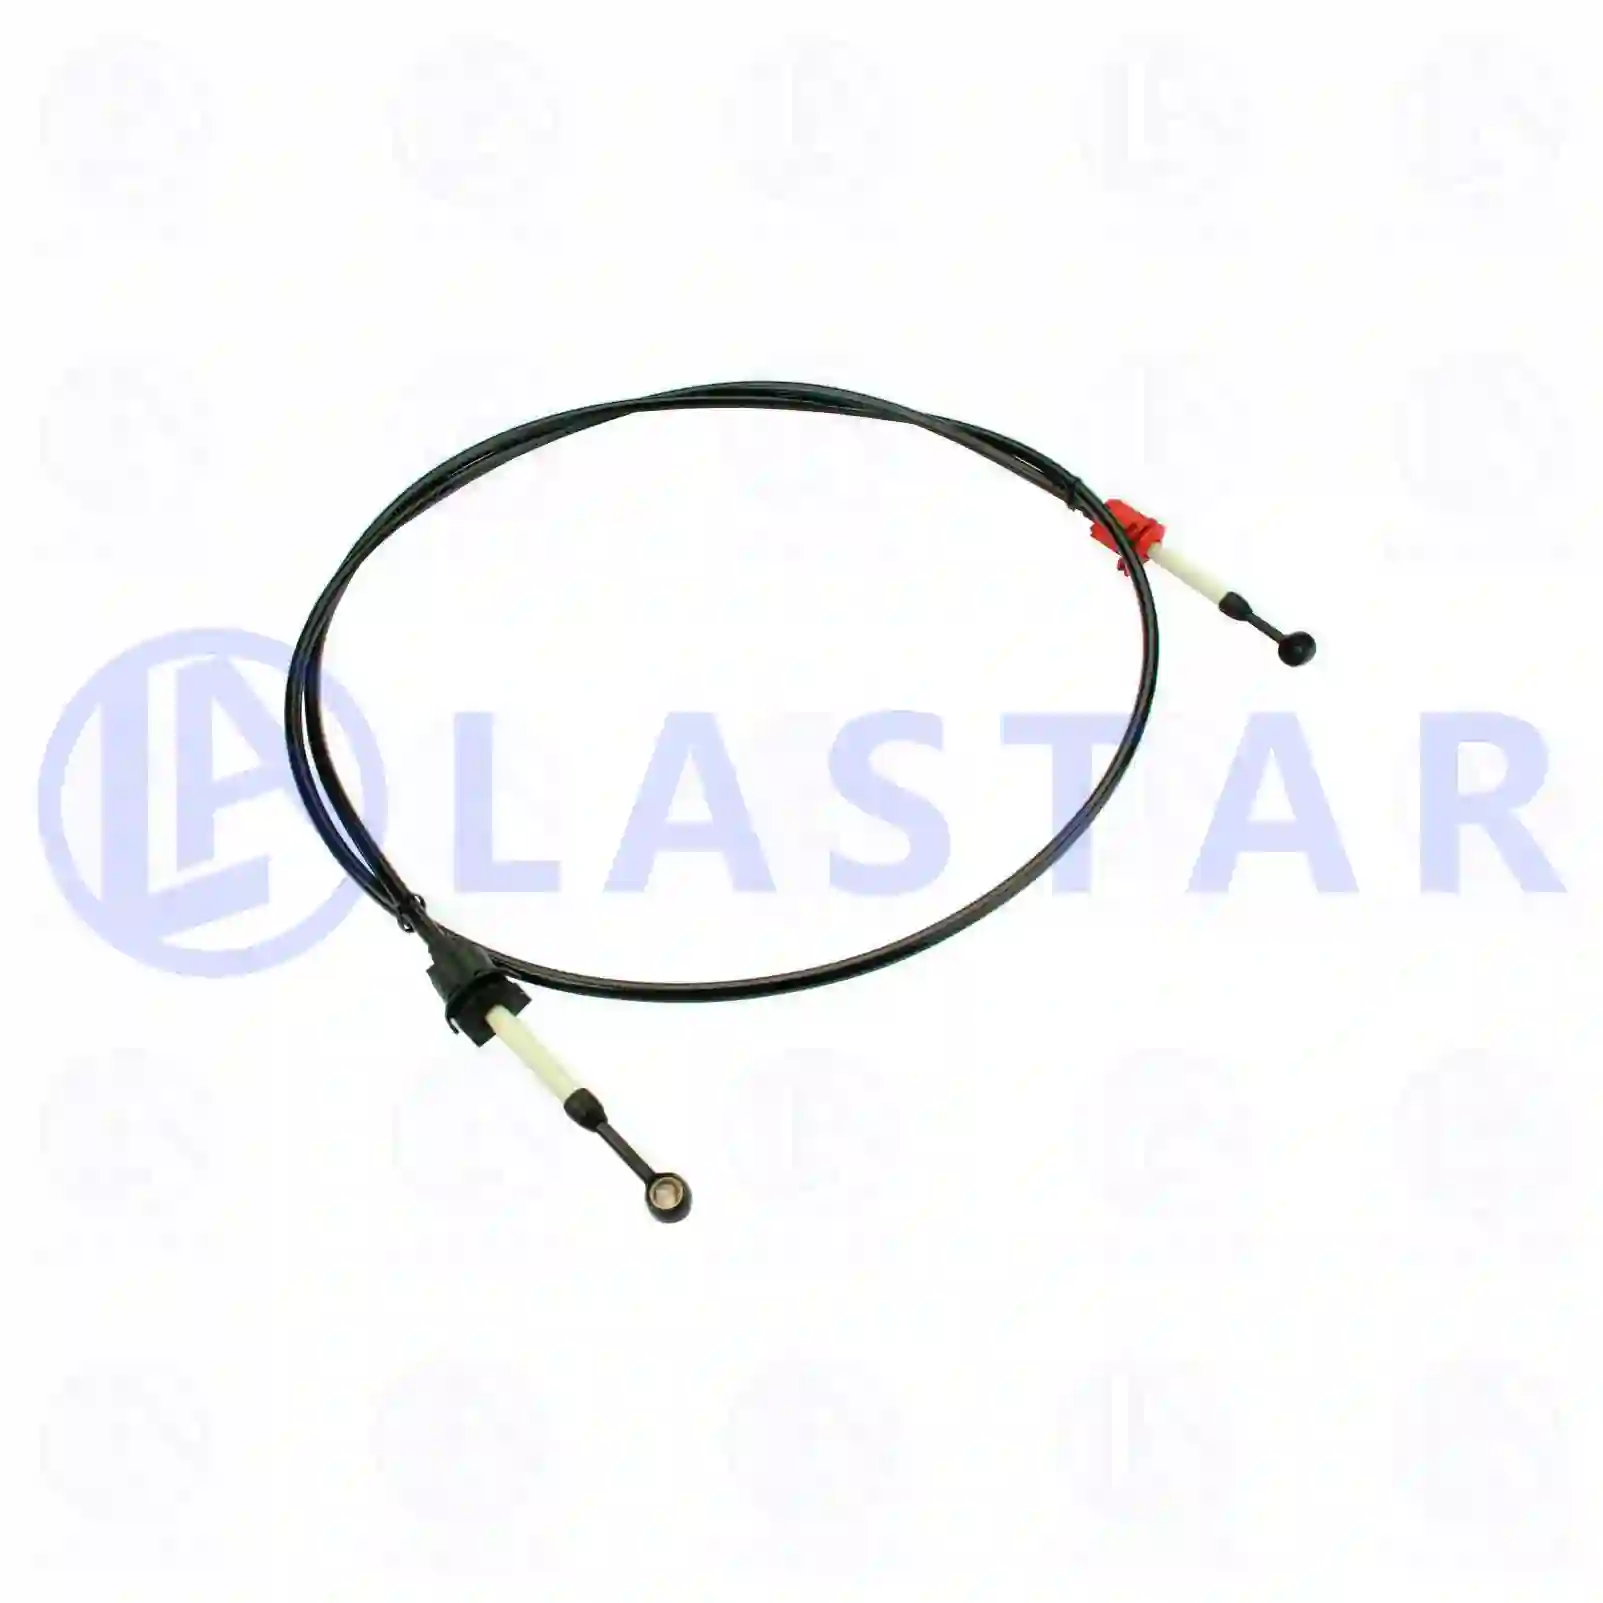 Control cable, switching, 77732414, 20545964, 20700964, 21002864, 21343564, 21789682 ||  77732414 Lastar Spare Part | Truck Spare Parts, Auotomotive Spare Parts Control cable, switching, 77732414, 20545964, 20700964, 21002864, 21343564, 21789682 ||  77732414 Lastar Spare Part | Truck Spare Parts, Auotomotive Spare Parts